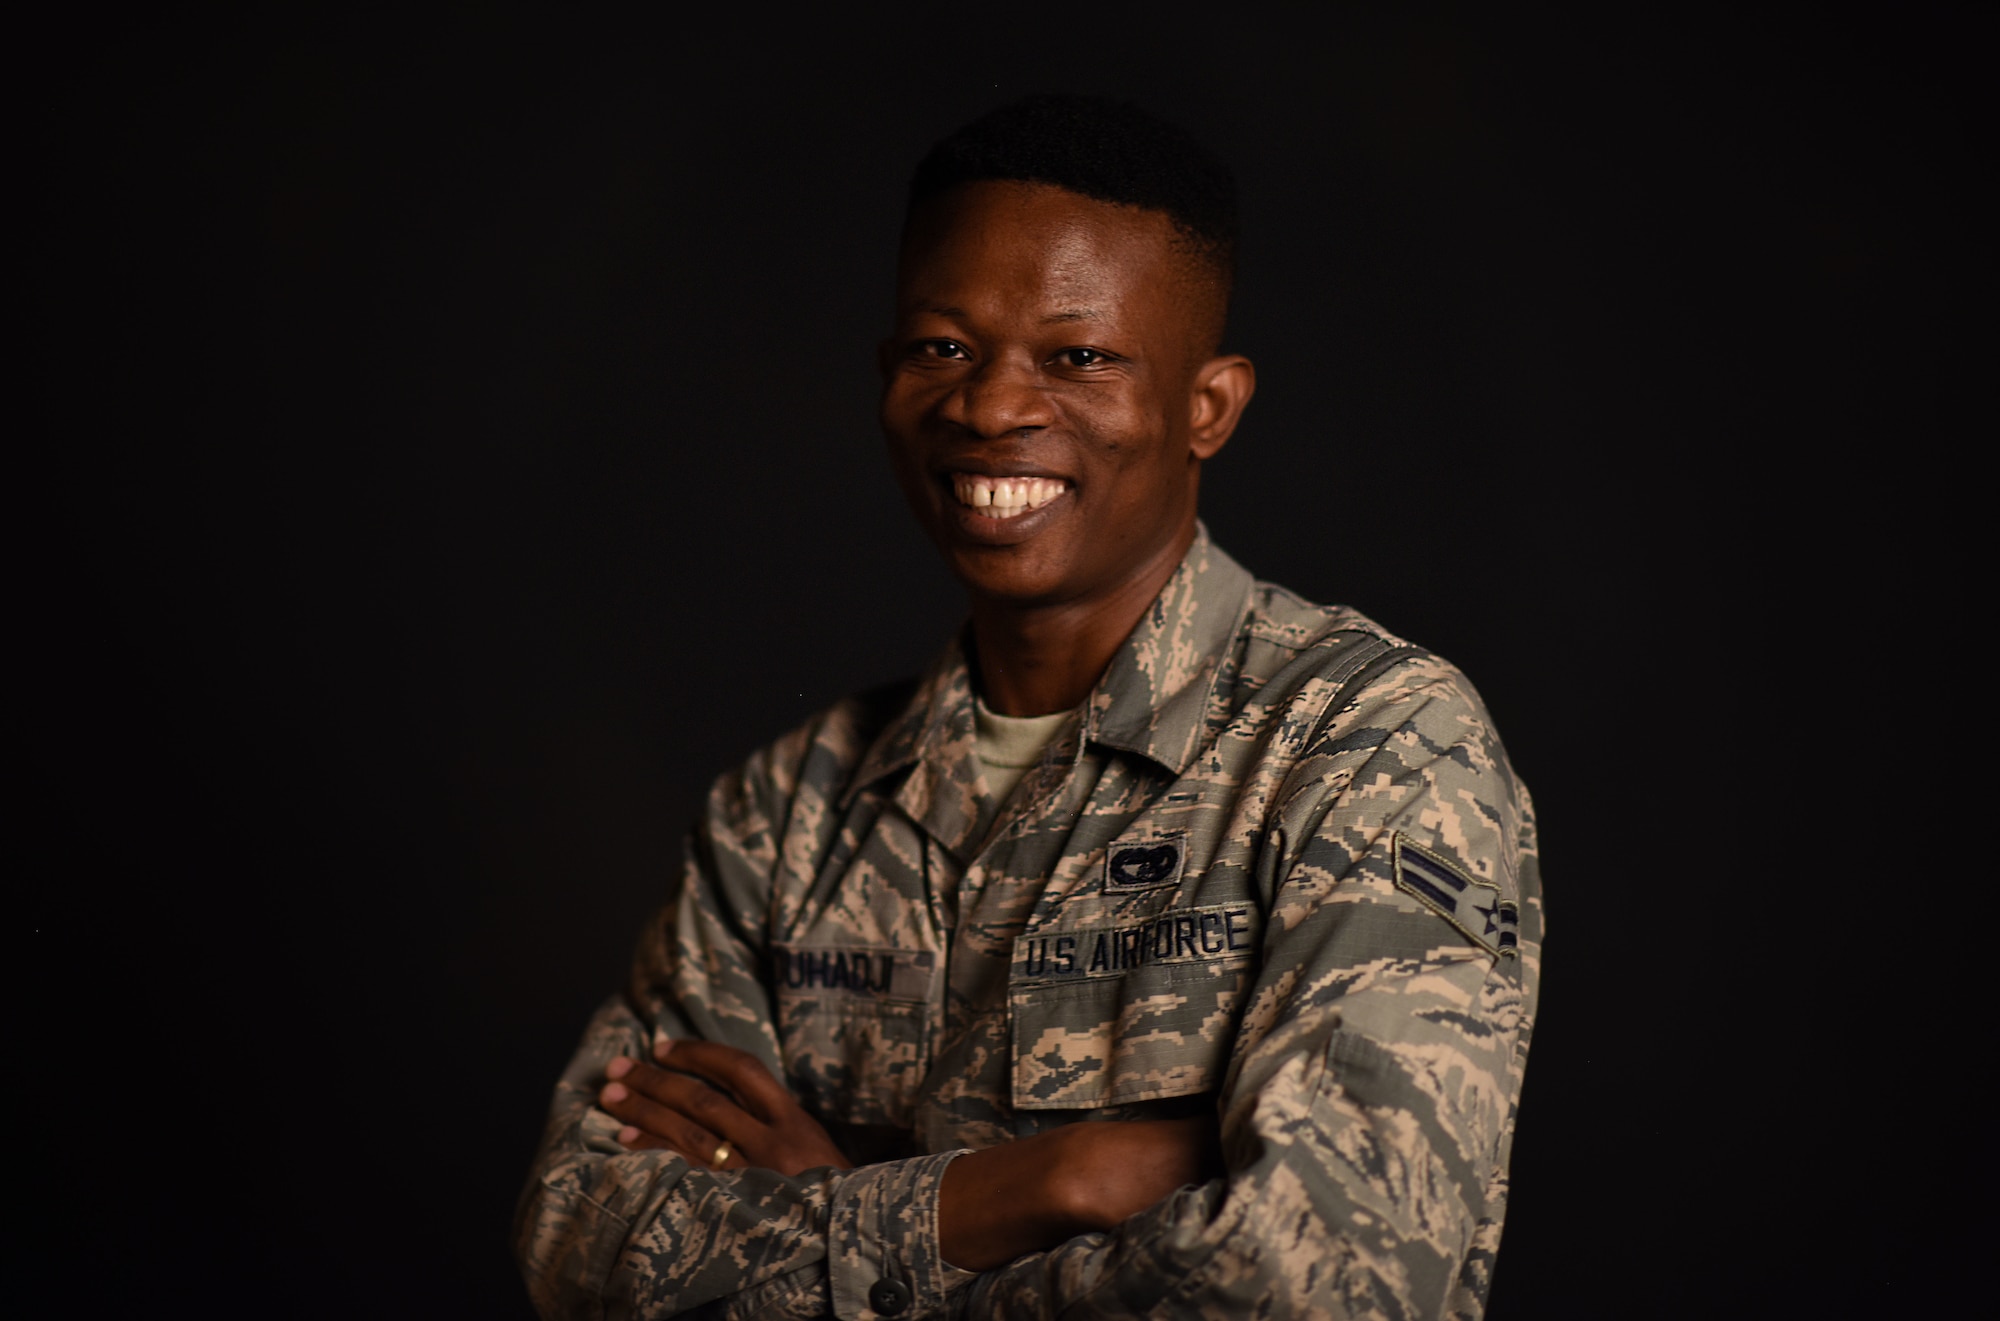 Airman 1st Class Kofi Combey Douhadji, 92nd Logistics Readiness Squadron vehicle operator, poses for a photo at Fairchild Air Force Base, Washington, April 17, 2018. Douhadji and his family participated in the online Diversity Visa Lottery Program and were selected by the program to immigrate to the U.S with a 10-year visa. Six months after arriving in the U.S., Douhadji enlisted in the U.S. Air Force. (U.S. Air Force photo/Airman 1st Class Jesenia Landaverde)